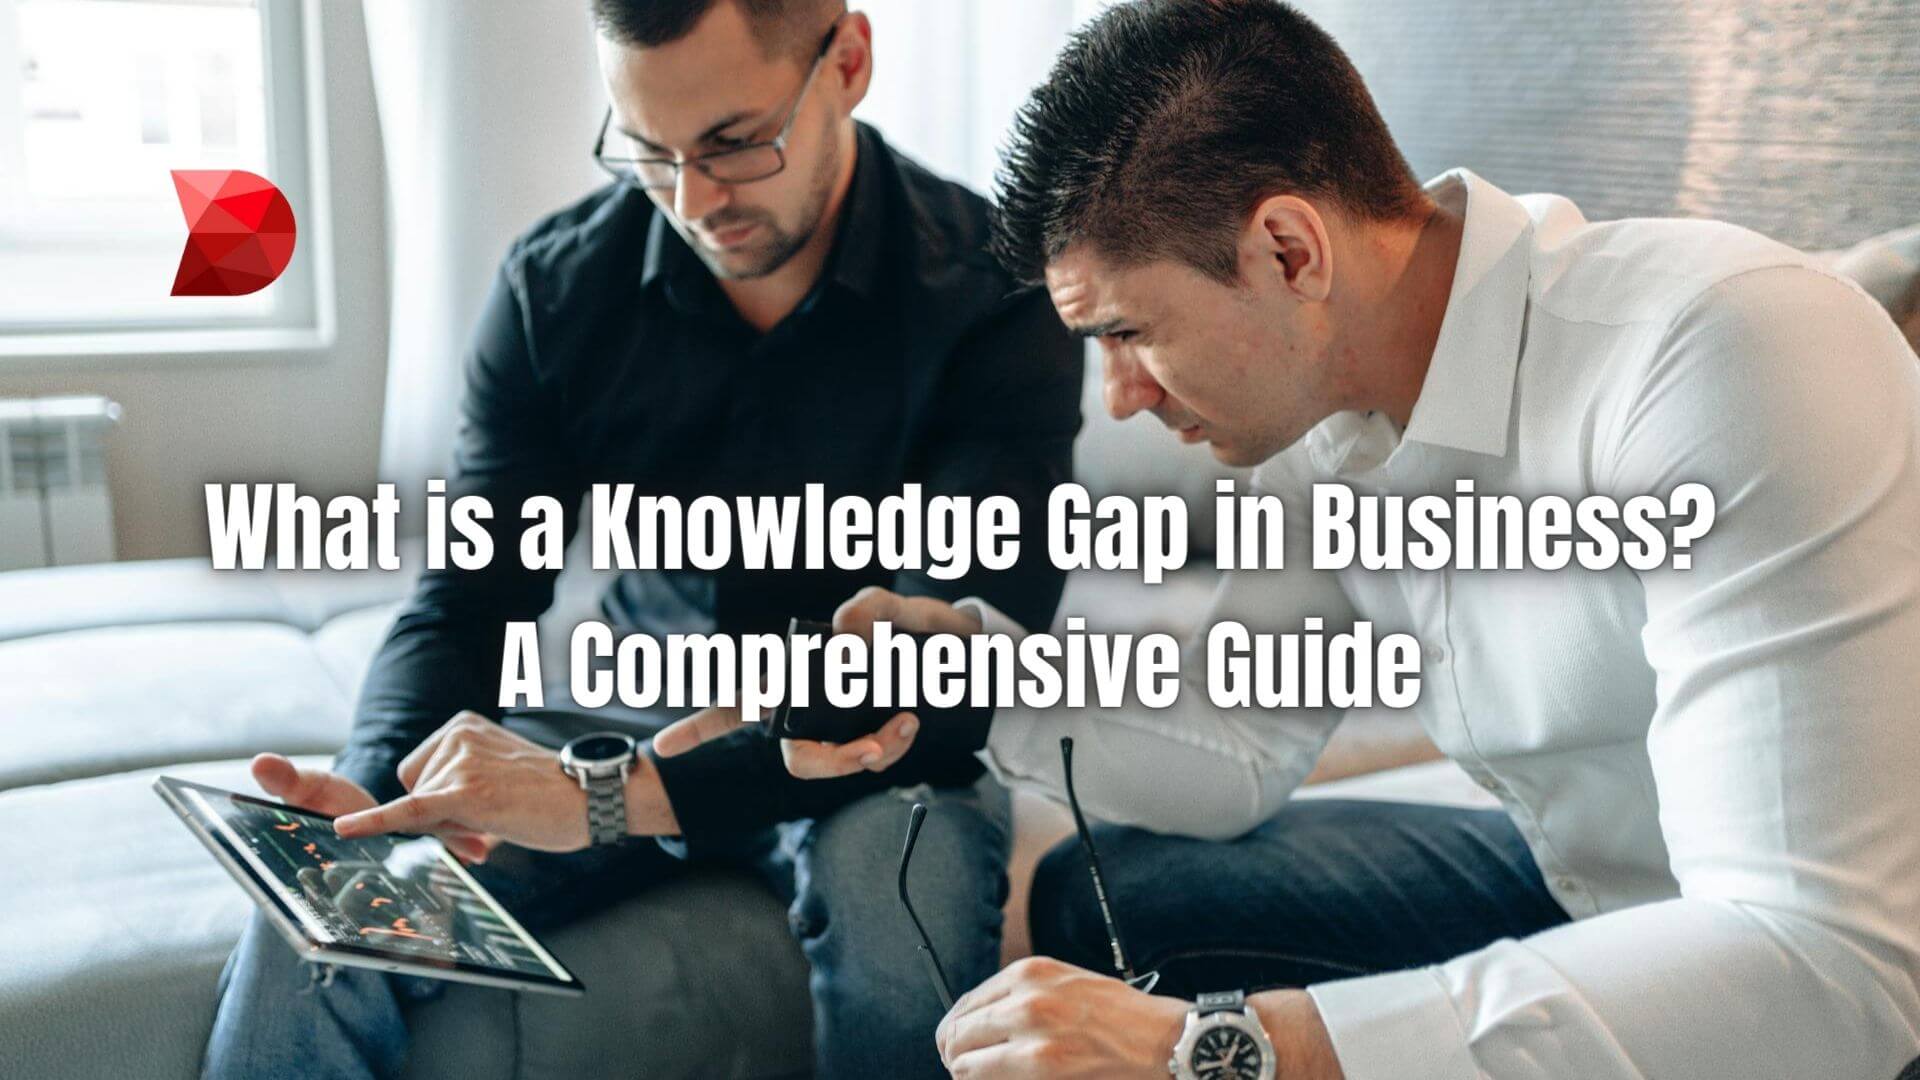 Uncover the essence of knowledge gaps in business with our comprehensive guide. Learn why they matter and how to bridge them effectively.